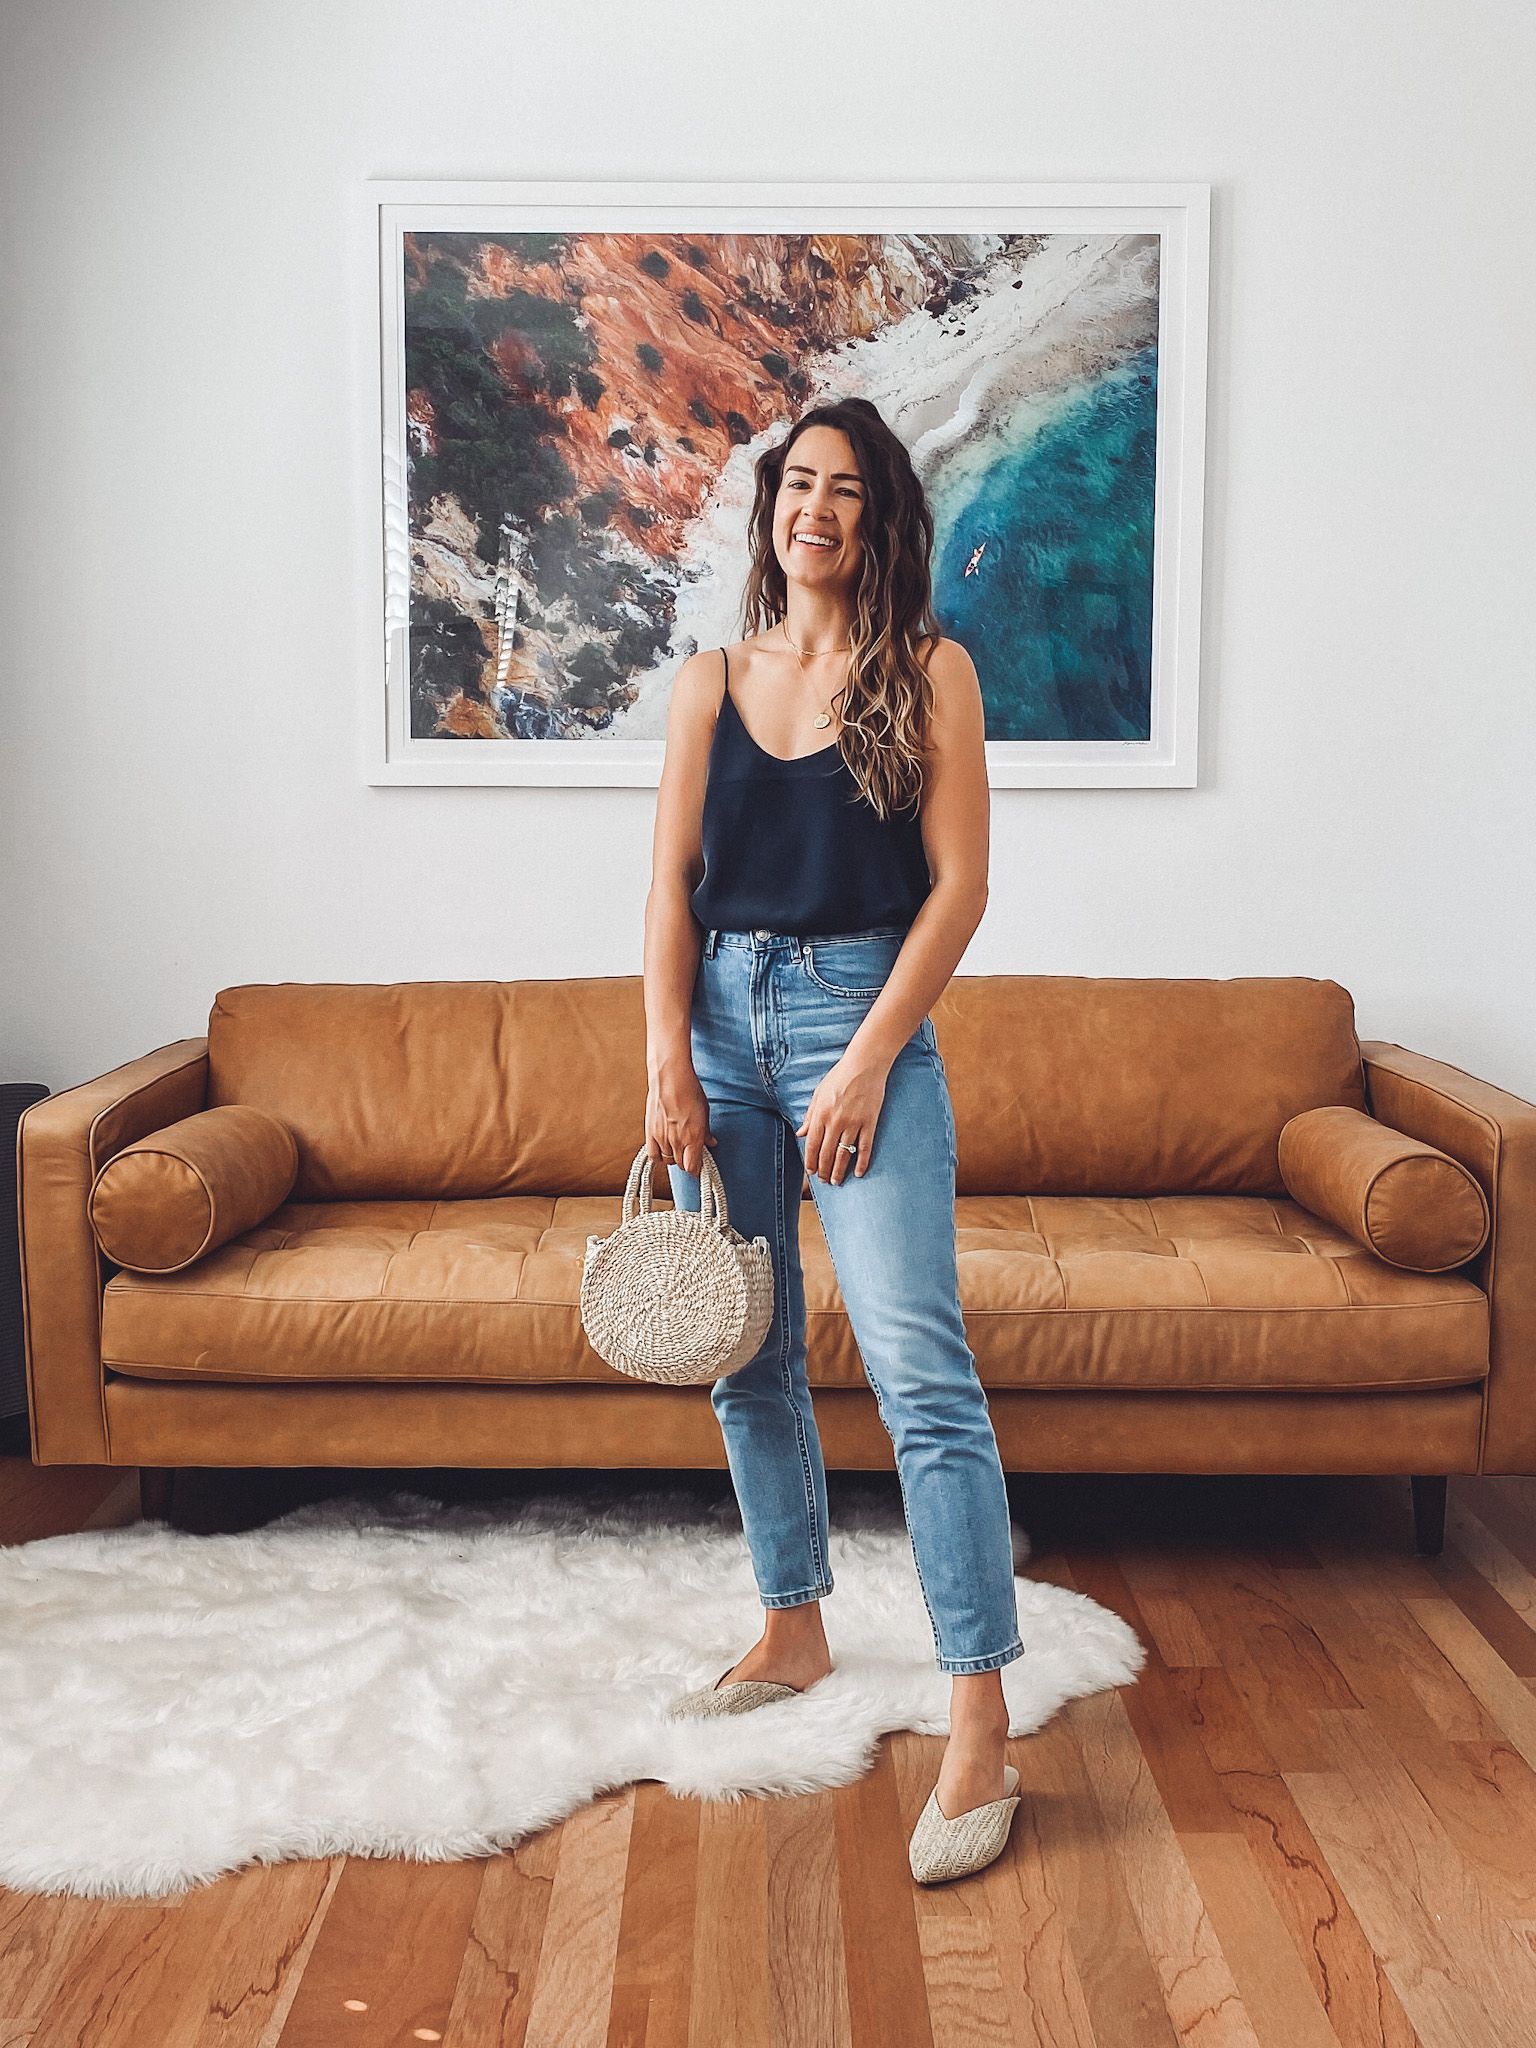 27 Piece Summer Capsule with Everlane – Natalie Borton Blog - 27 Piece Summer Capsule with Everlane – Natalie Borton Blog -   19 style Summer jeans ideas